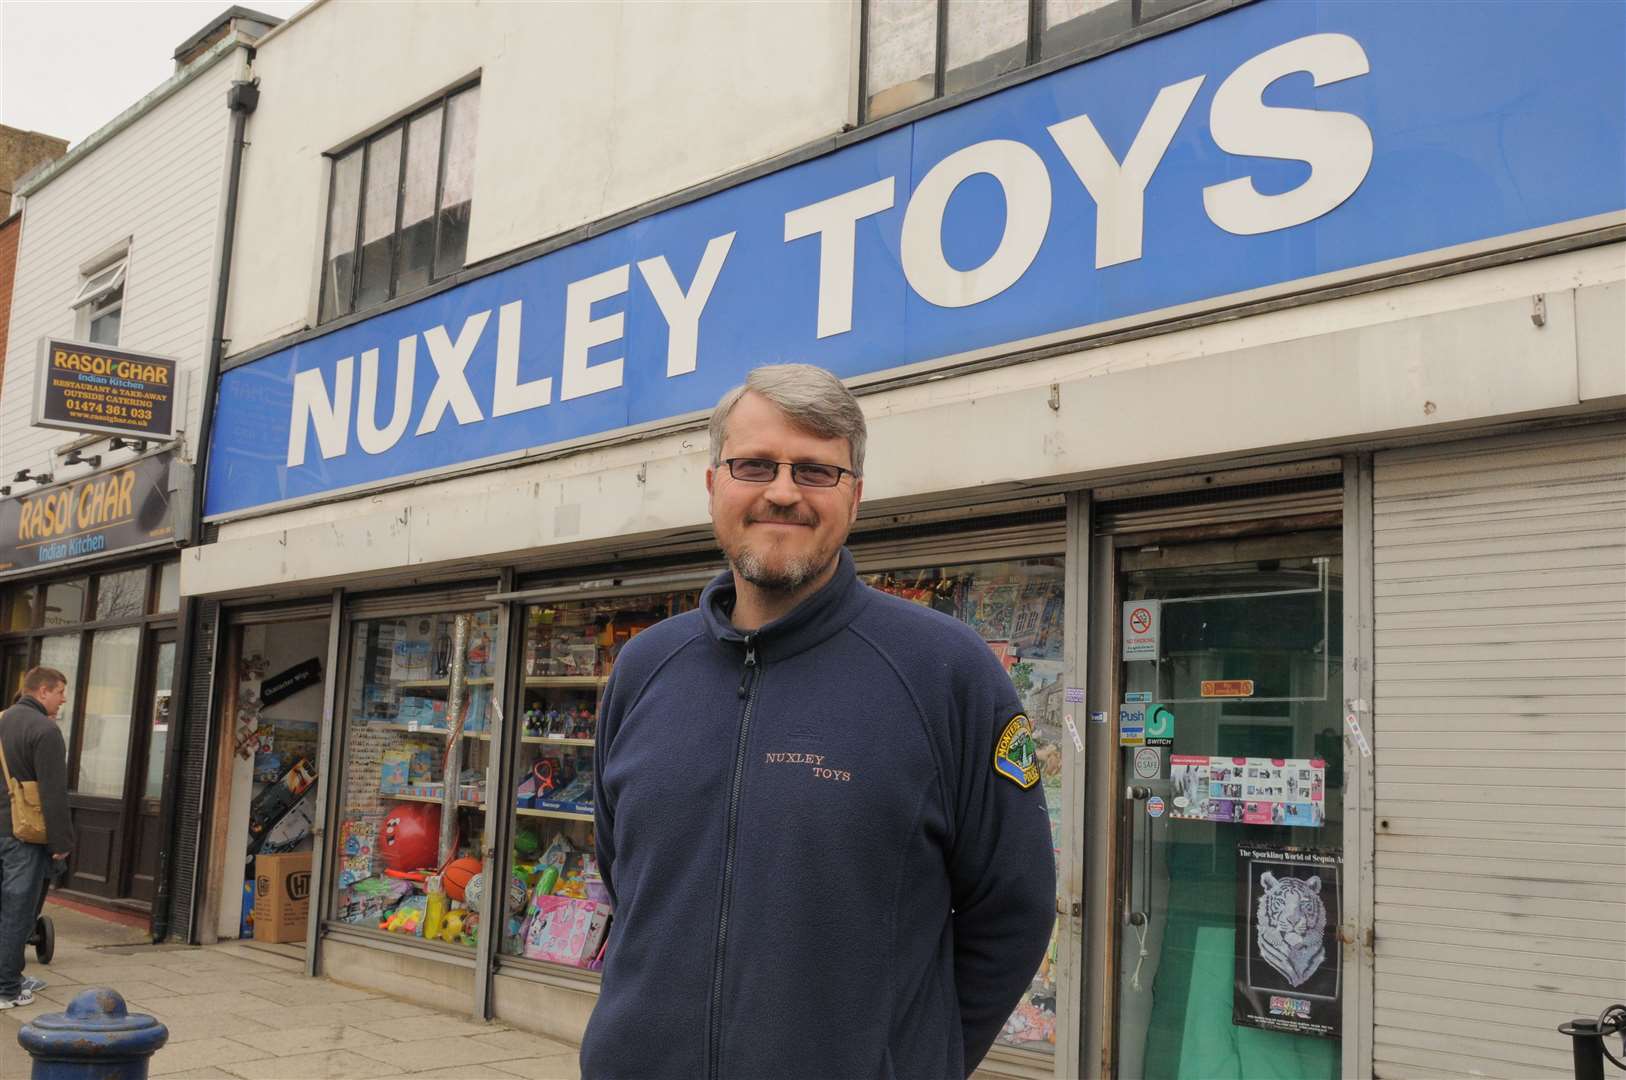 Former store manager Richard Ray. Picture: Steve Crispe